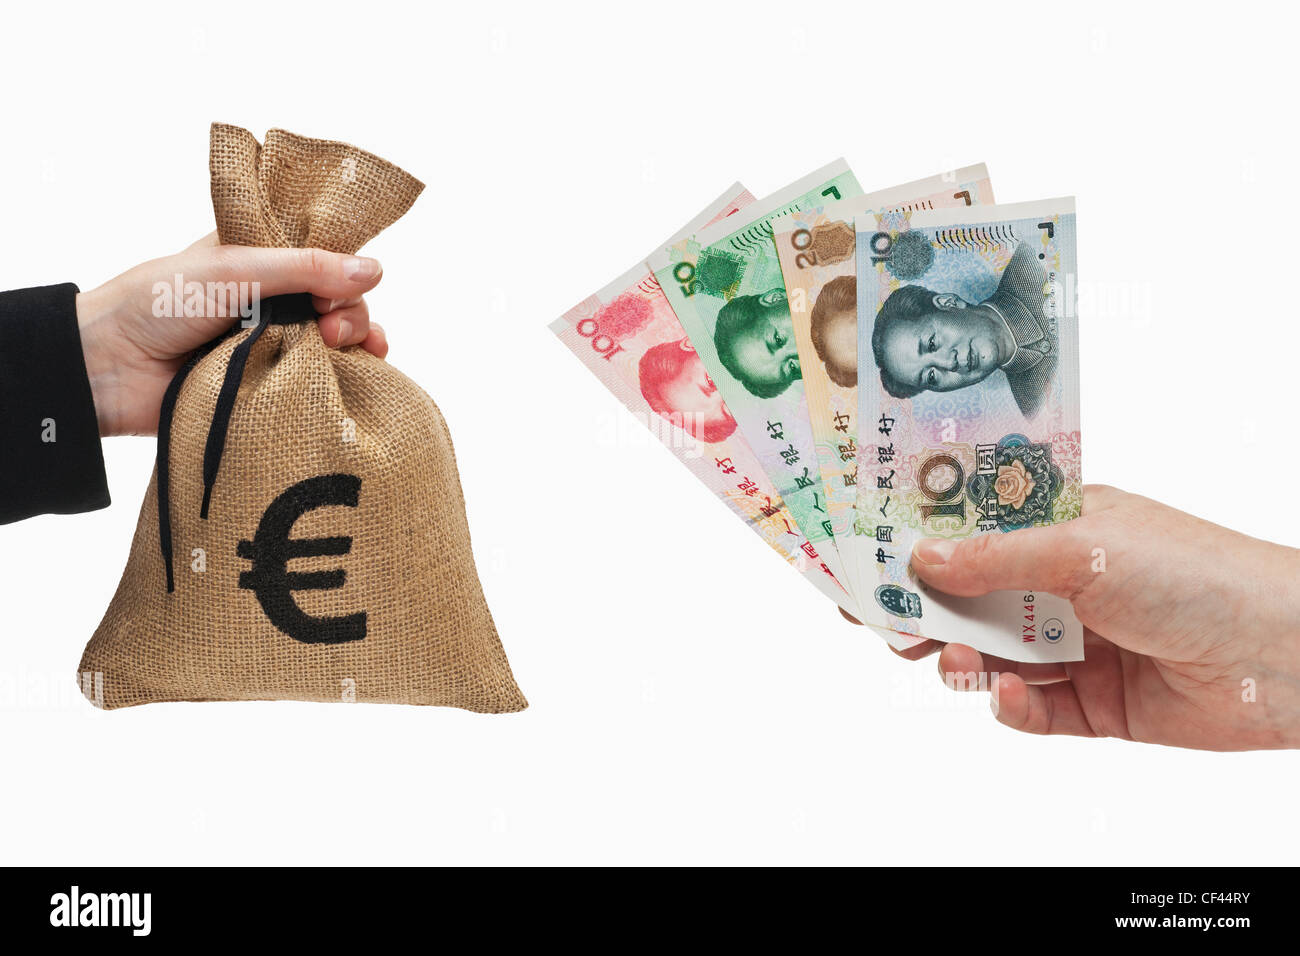 Diverse Chinese Yuan bills are held in the hand. At the other side a money bag with a Euro currency sign held in the hand. Stock Photo